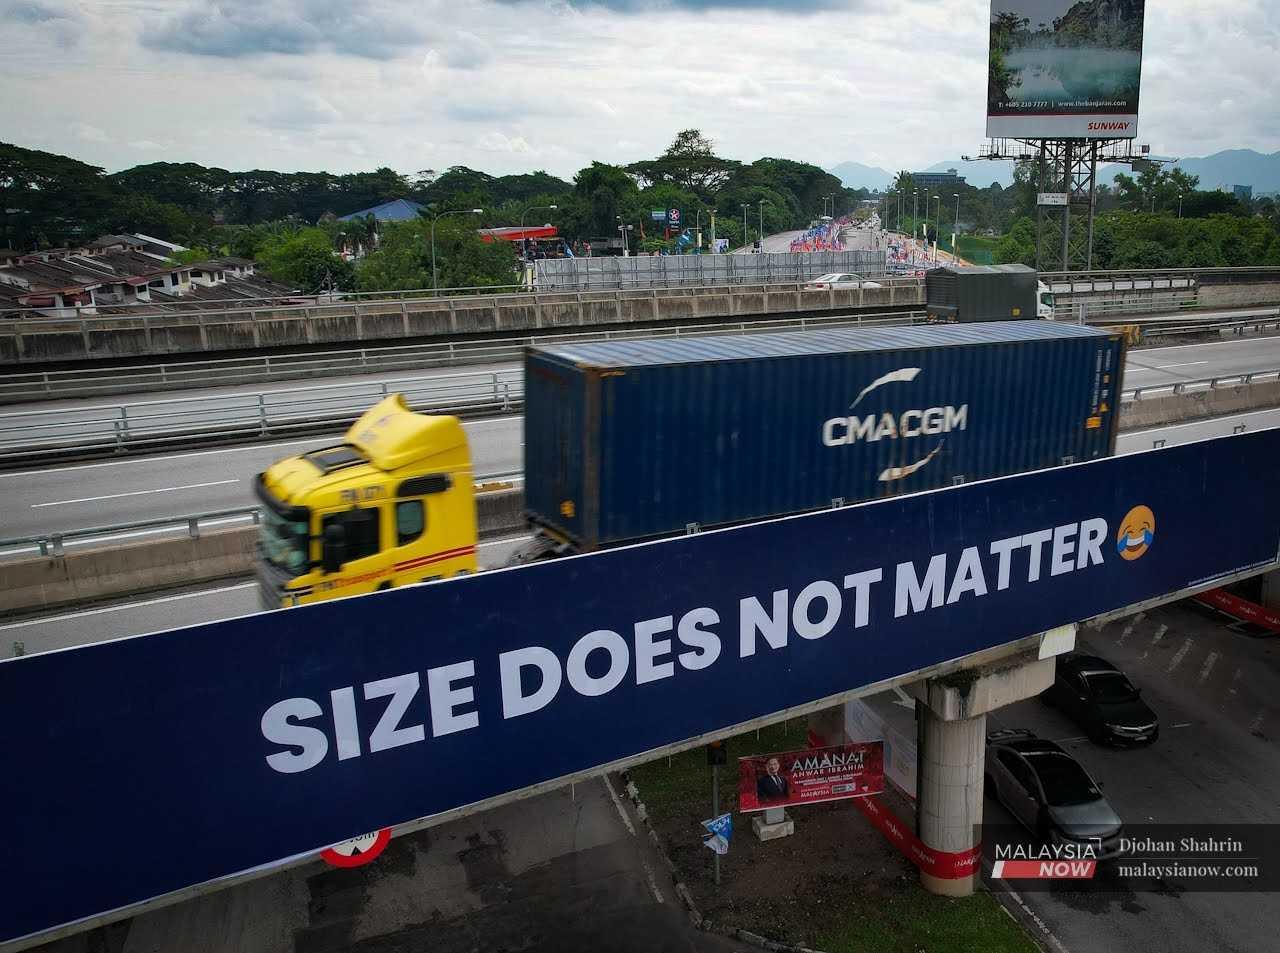 Another sign, put up by Perikatan Nasional along a major road, reads 'Size Does Not Matter'.